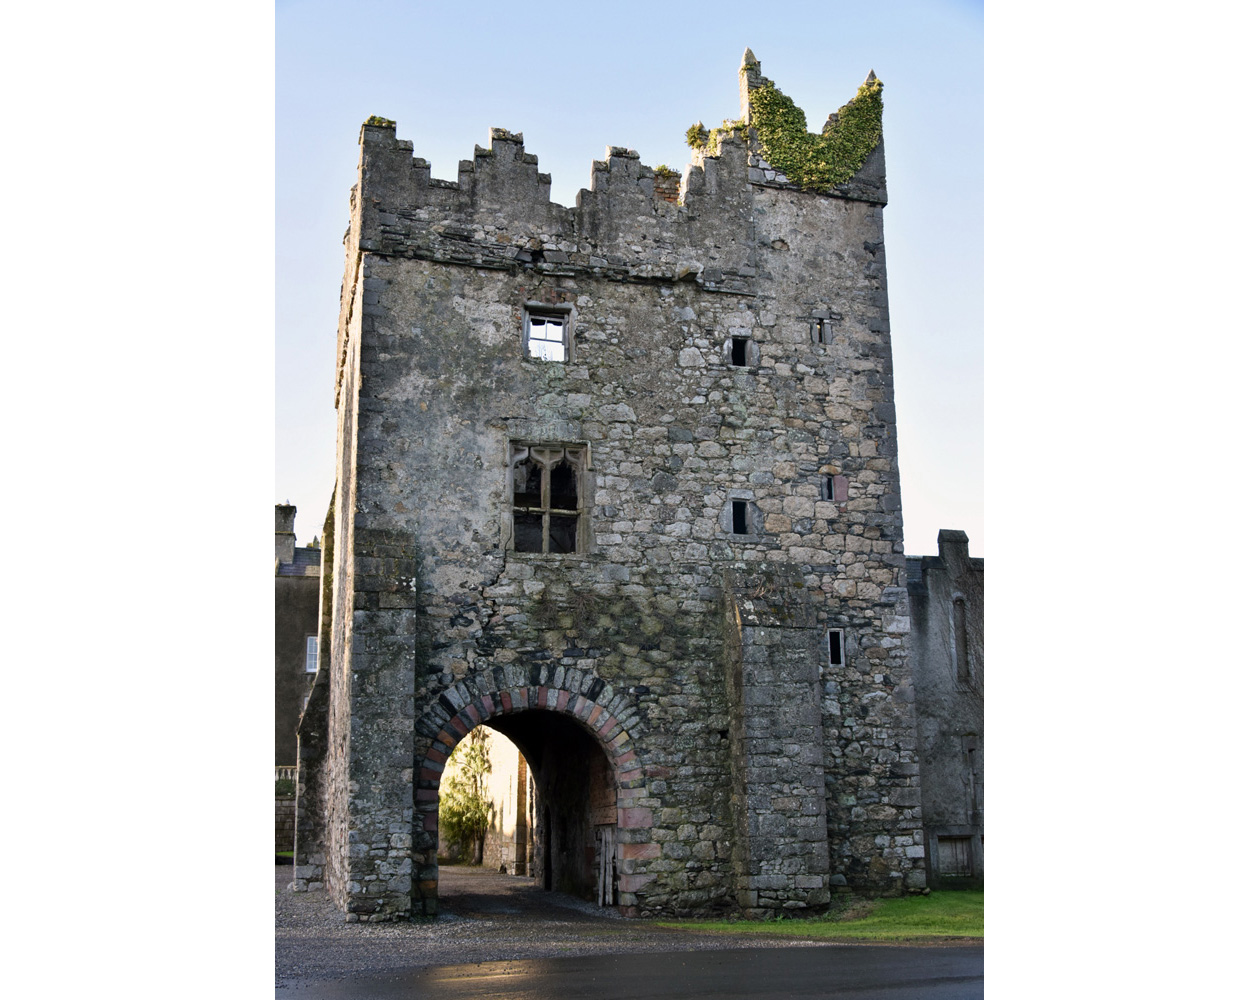 A small section of Howth Castle which dates to medieval times and has been the home of the Gaisford-St. Lawrence family for over 800 years.